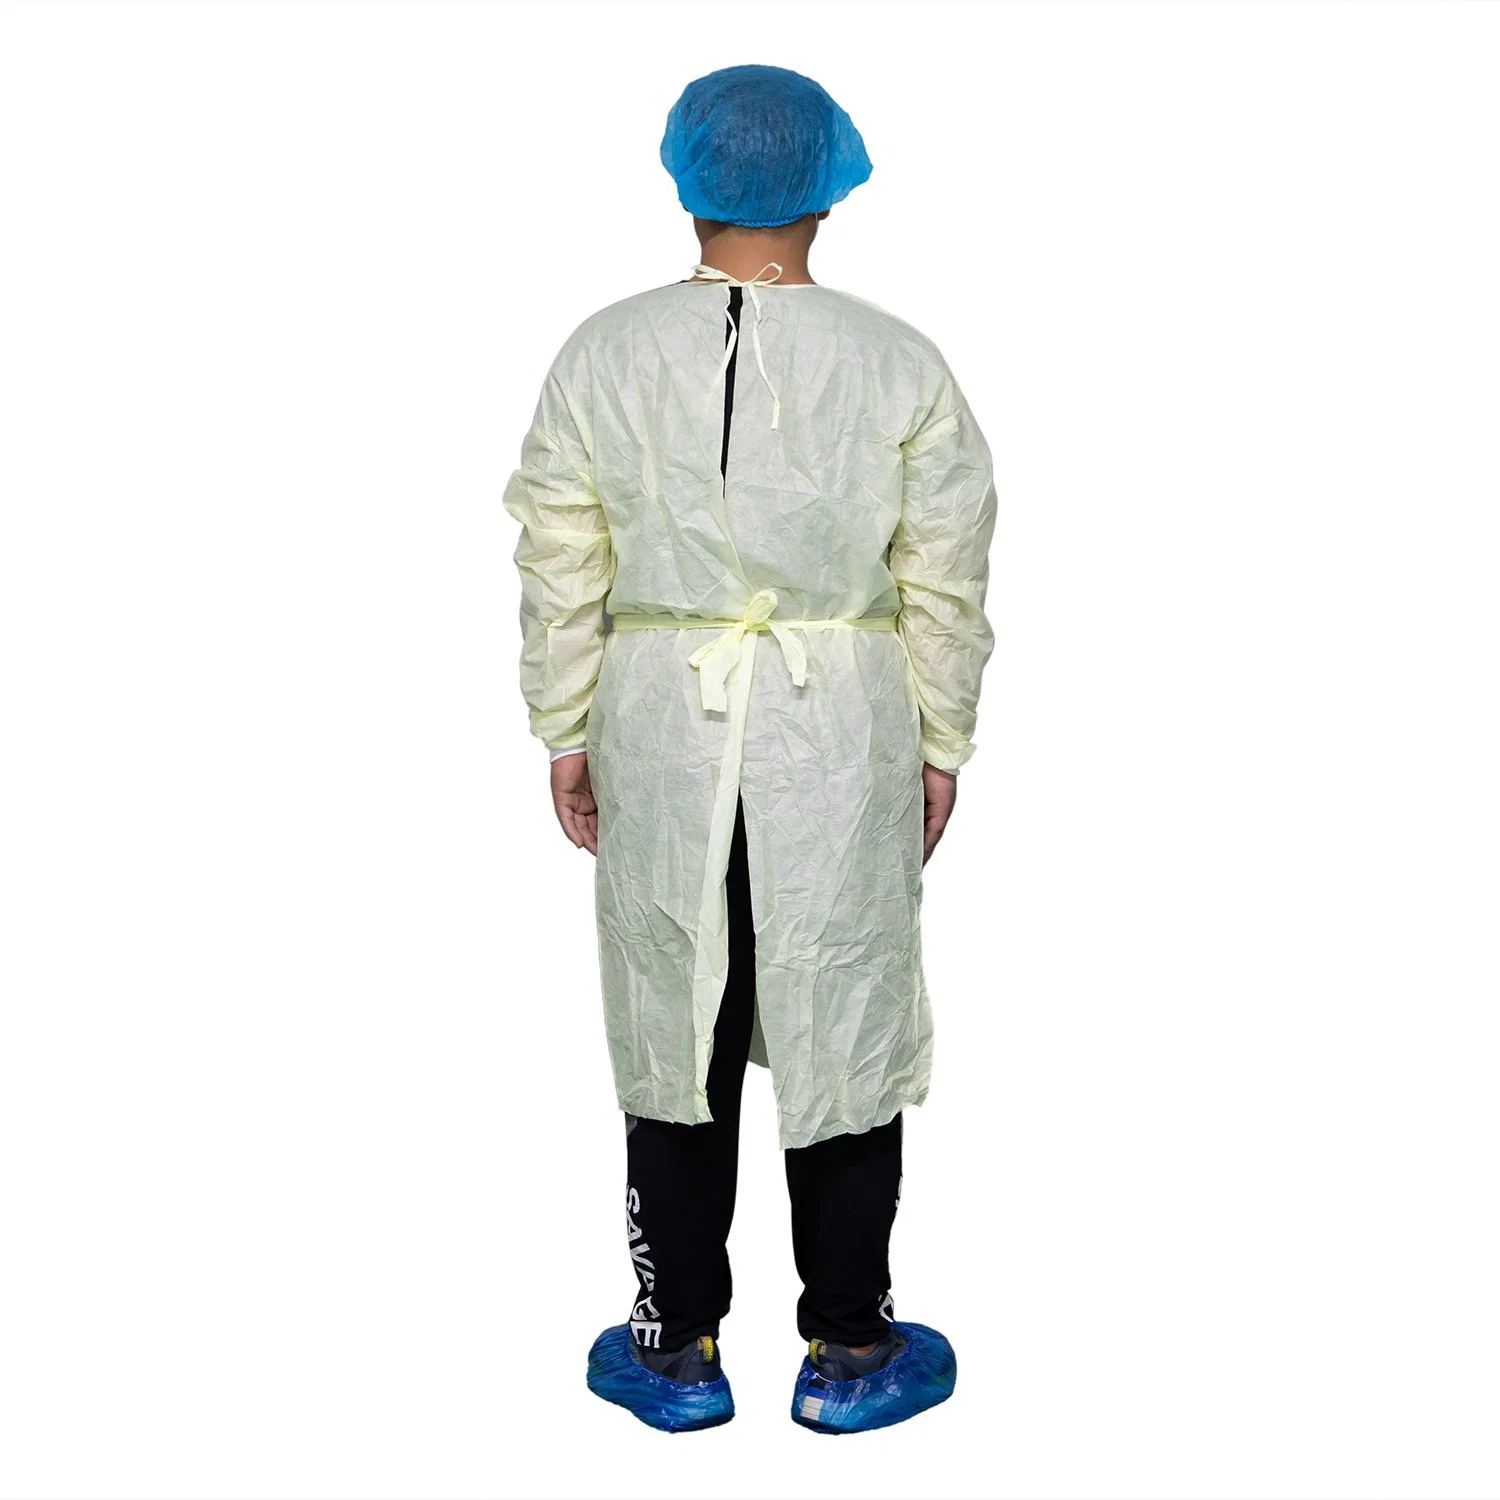 Disposable Isolation Gown Non-Woven Gown Waterproof Non-Surgical Gown (SMS) Level 1 in Stock